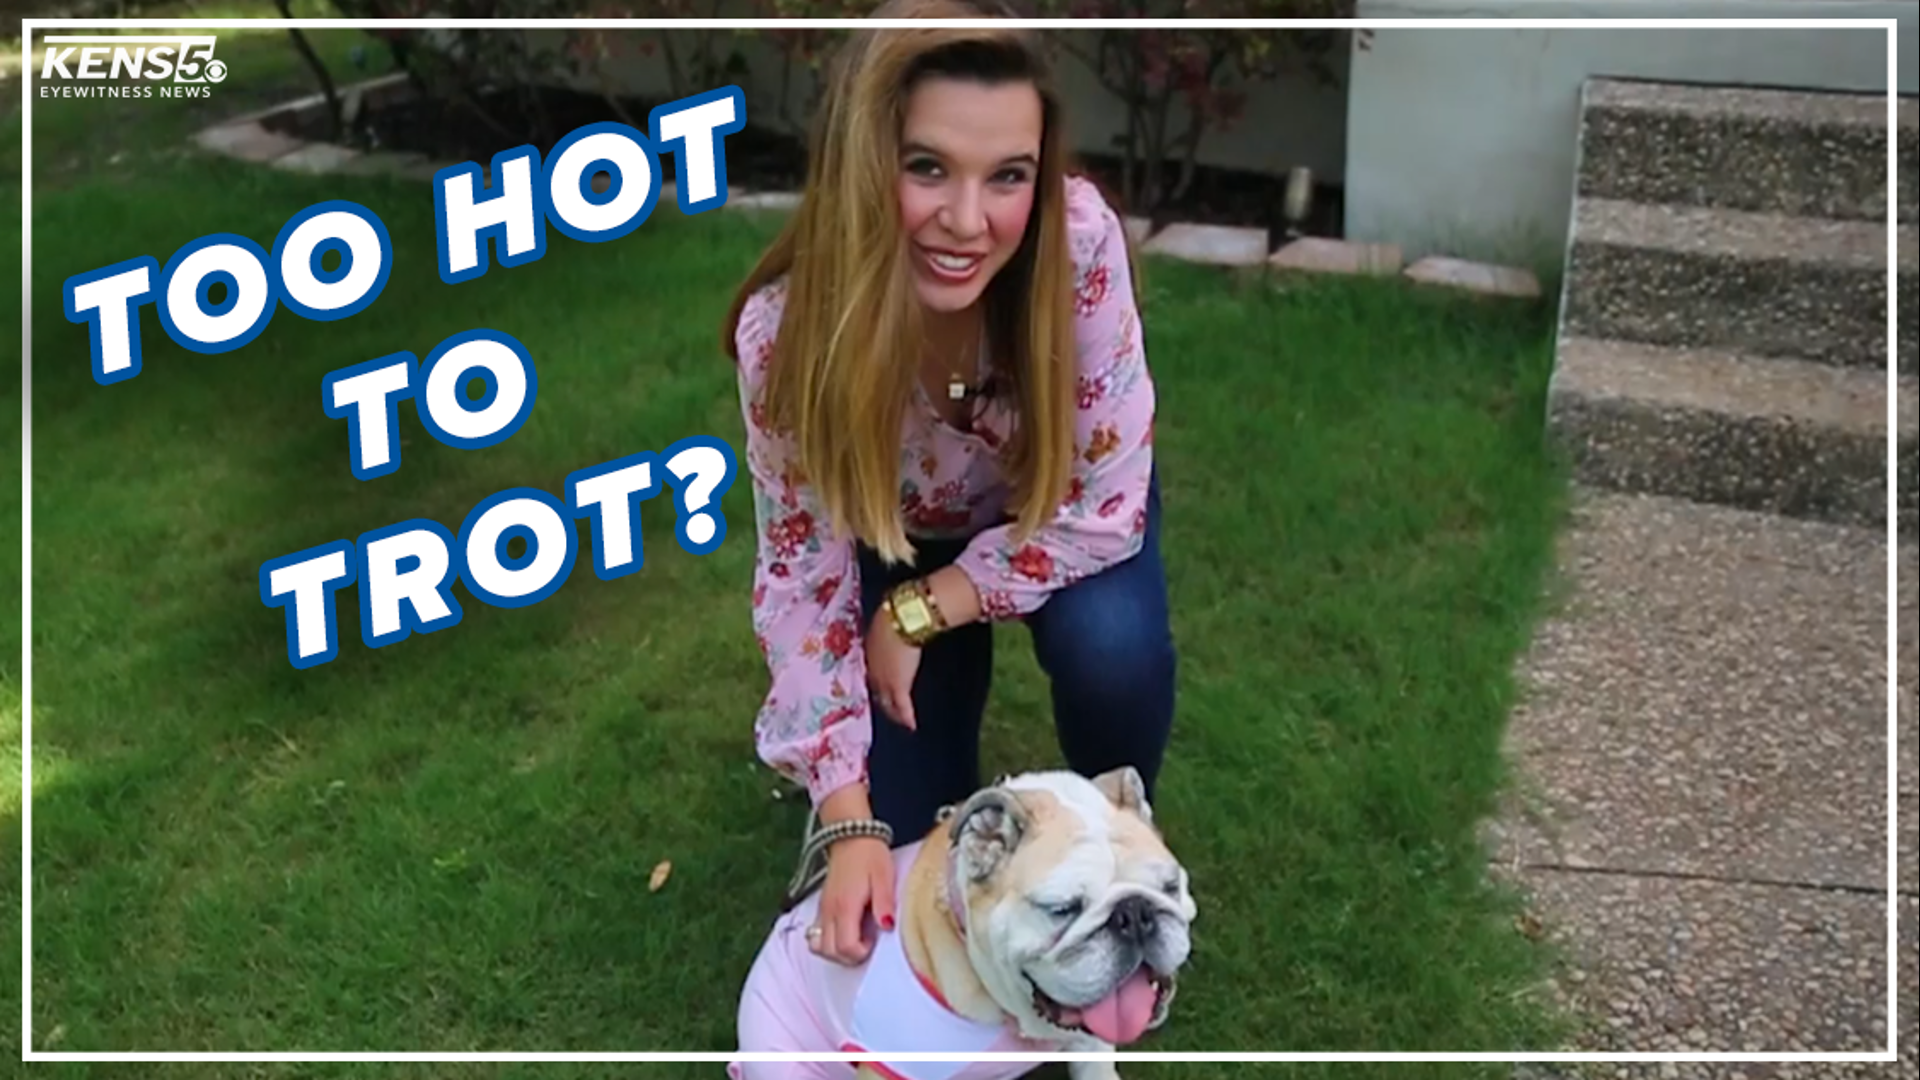 The Texas heat can be potentially dangerous for your pet. So digital reporter Lexi Hazlett gives you tips on how to keep your furry friend safe when walking them.